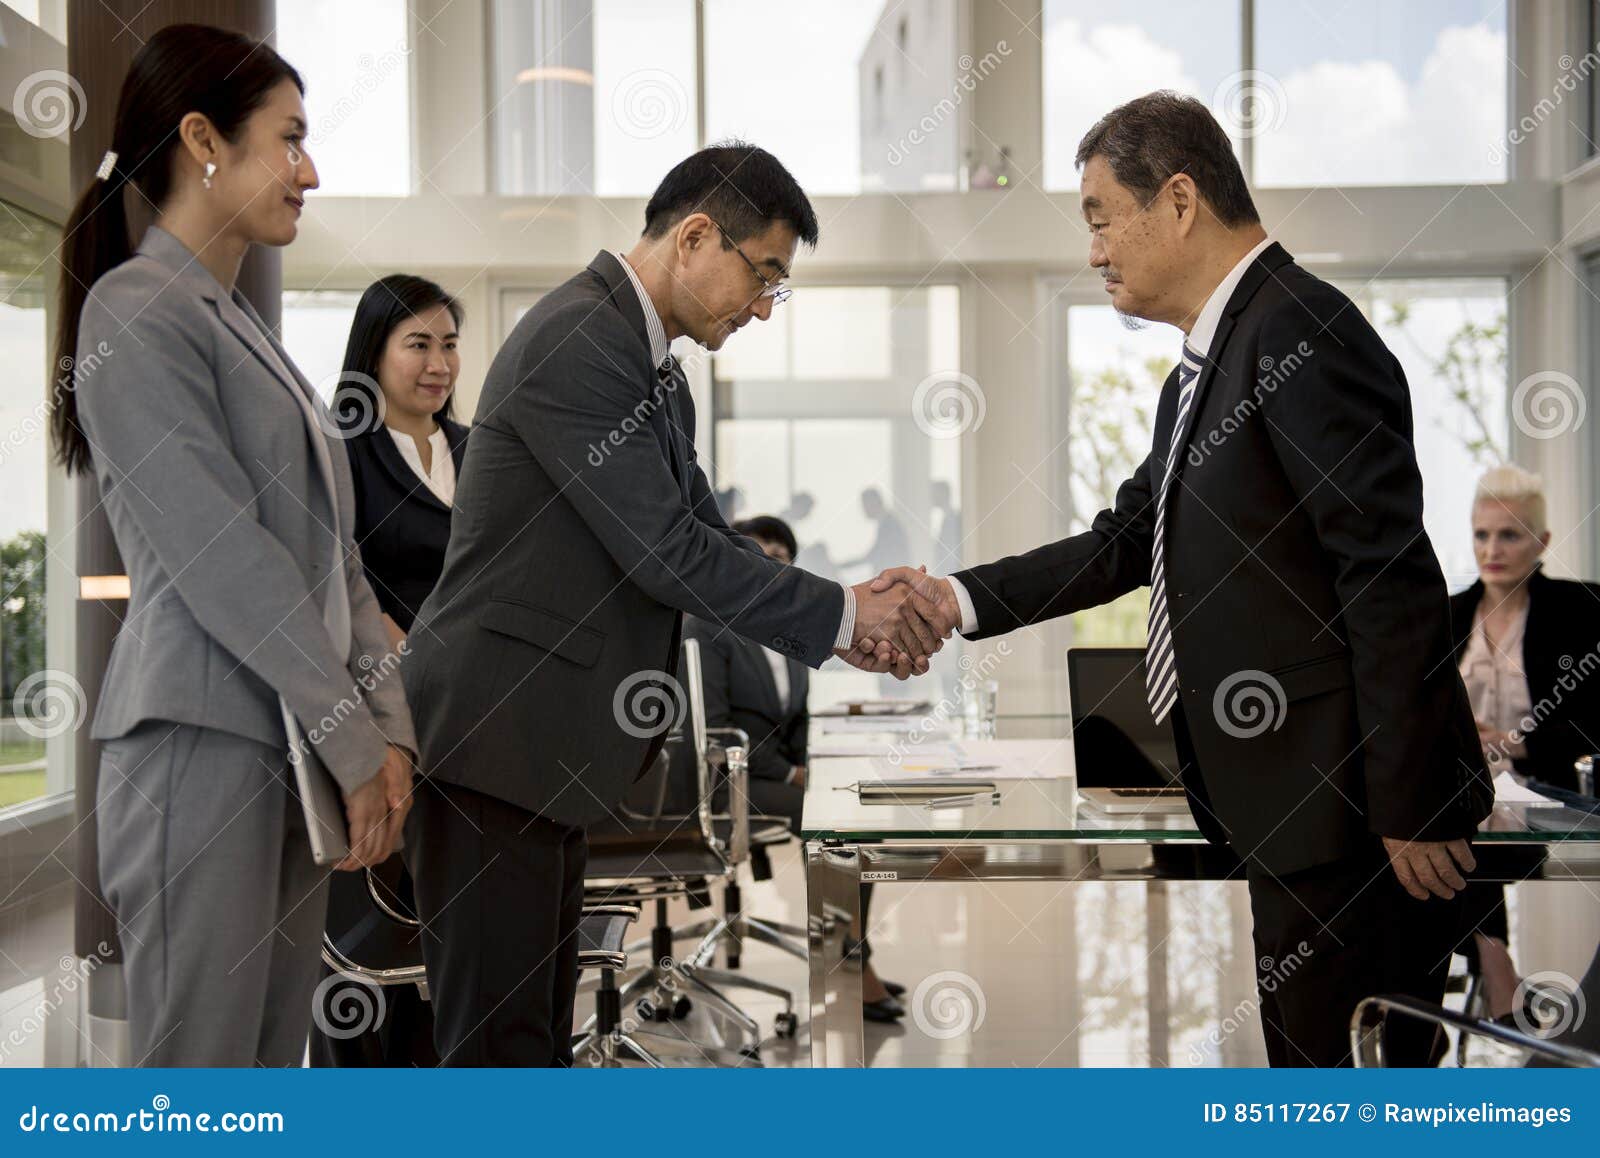 business partners introduction handshake bow concept